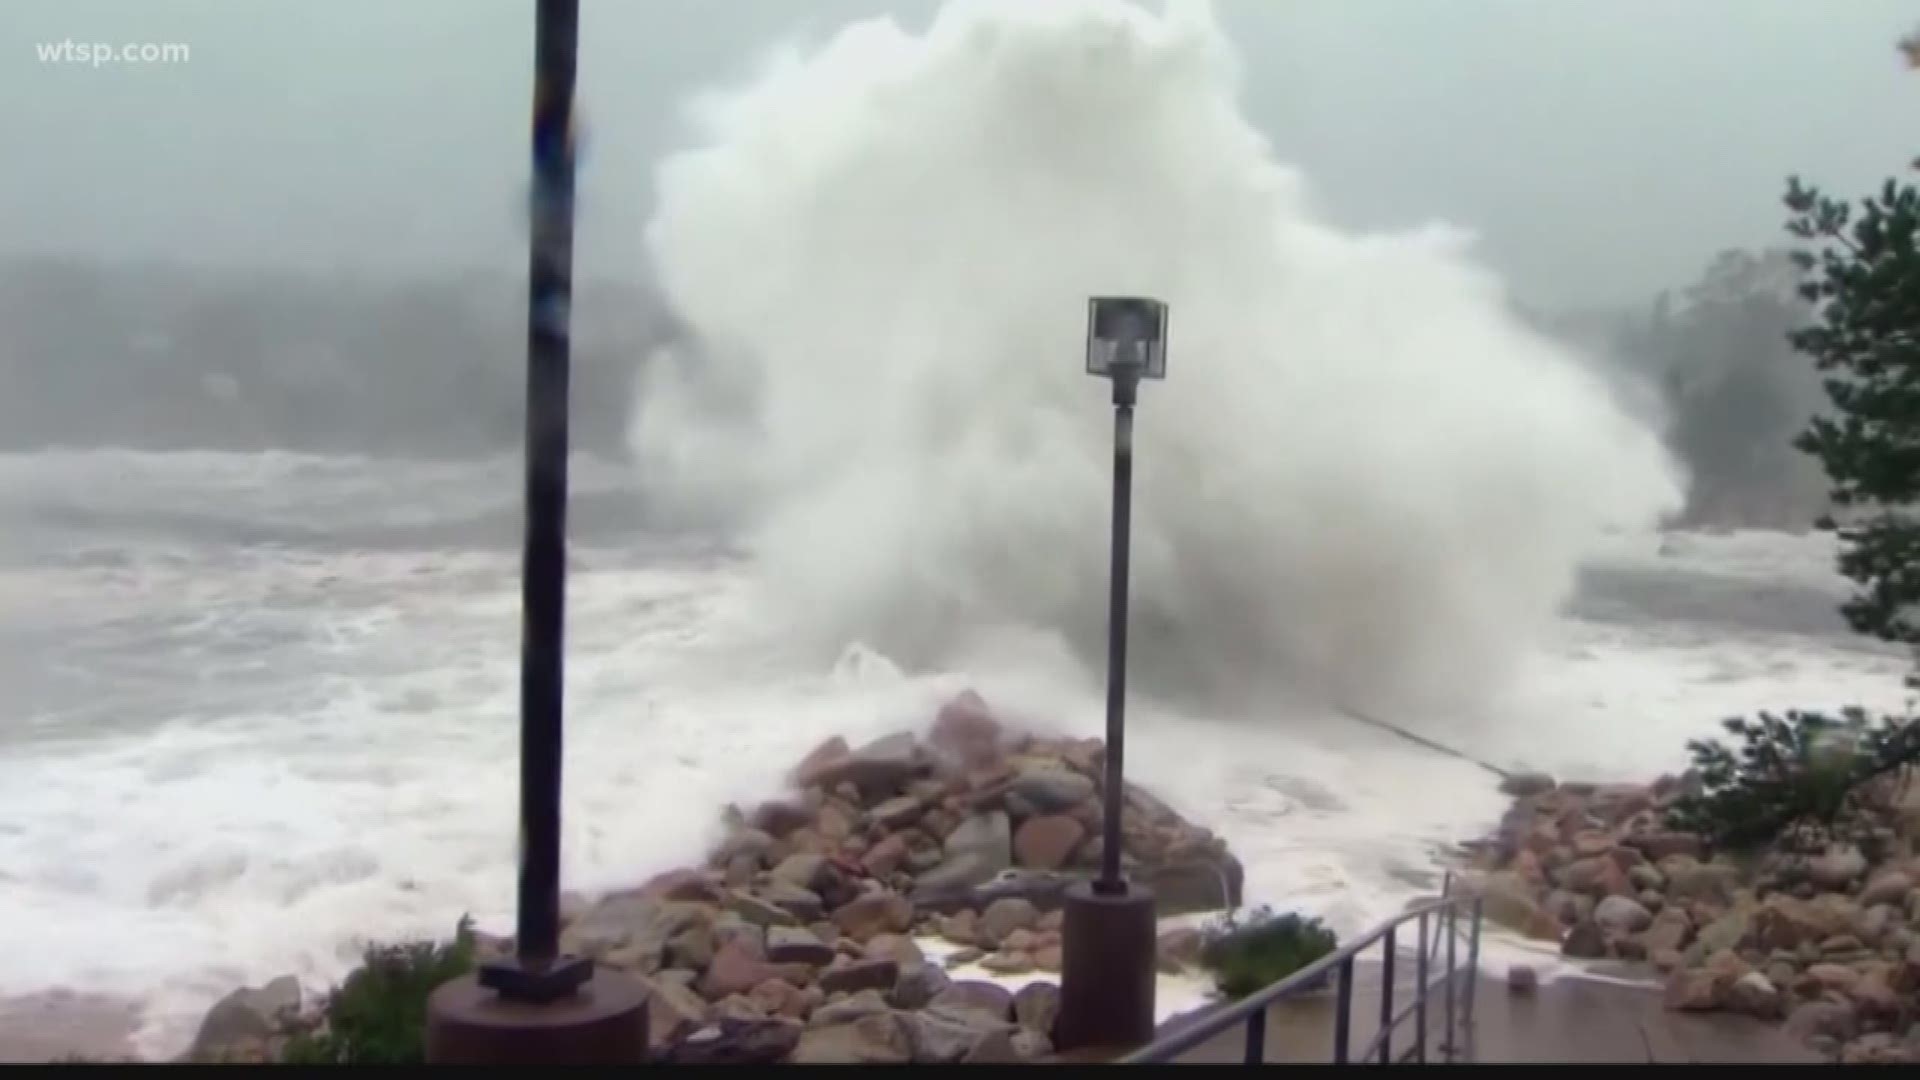 There were big waves and high winds in Nova Scotia, Canada, this morning where nearly 1 million people woke up in the dark thanks to Dorian. The storm knocked out power and dumped about 4 inches of rain.